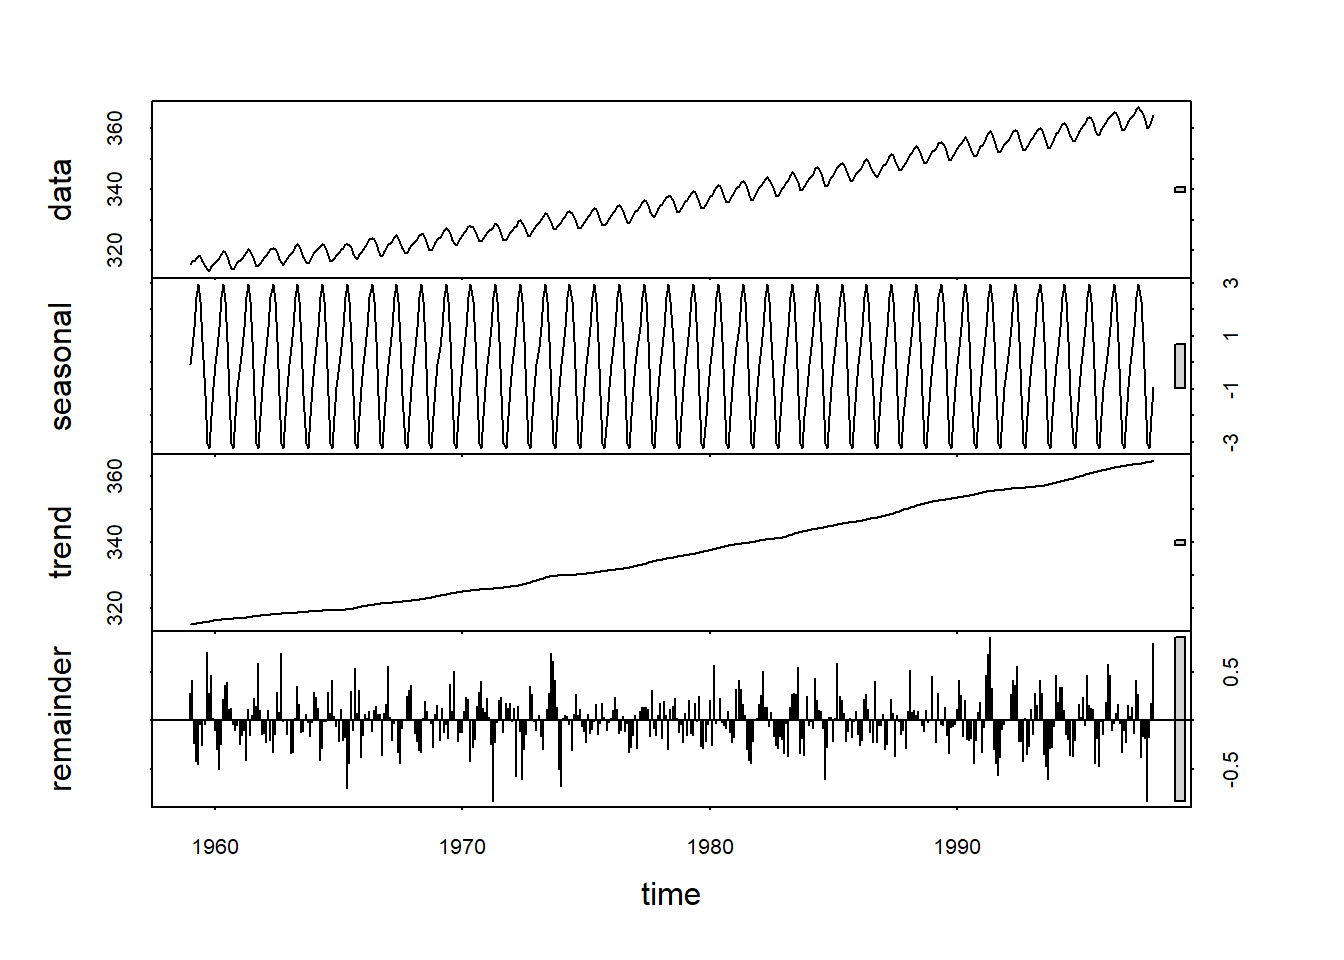 Seasonal decomposition of time series using loess (stl) applied to CO2